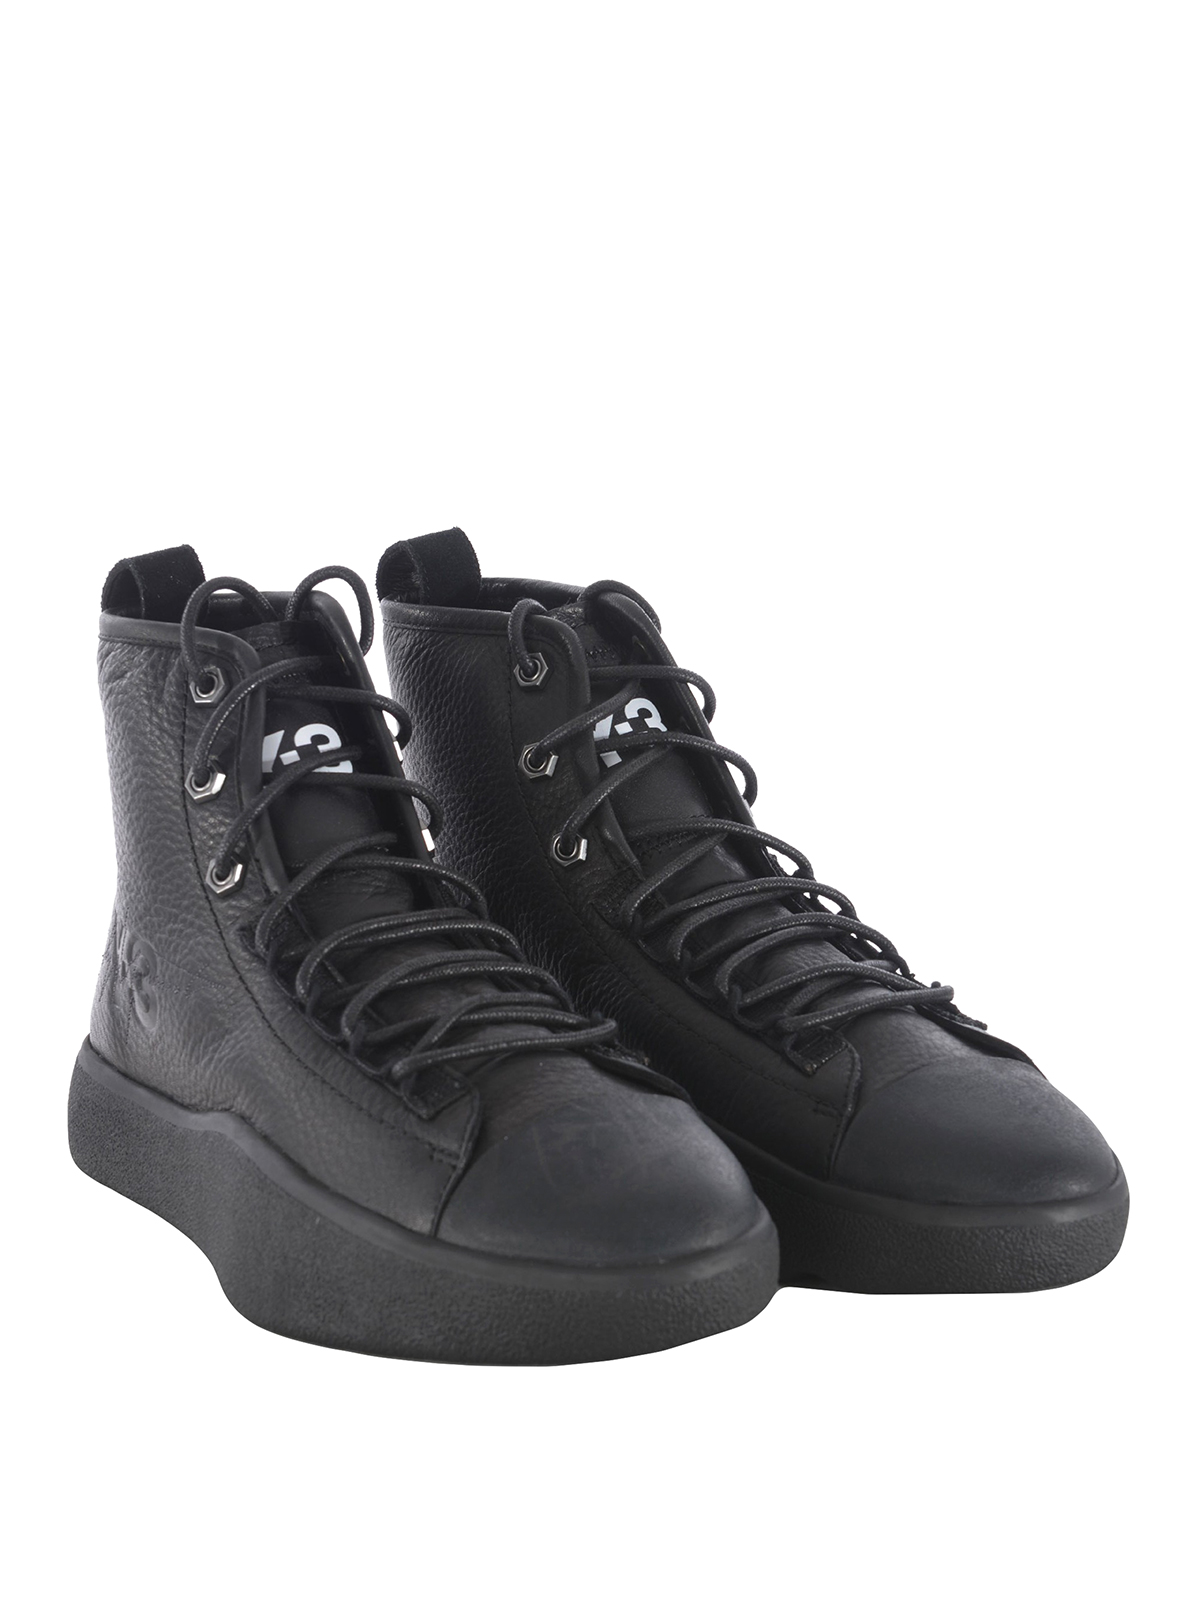 Trainers Adidas Y-3 - Leather hi-top sneakers with toecap -